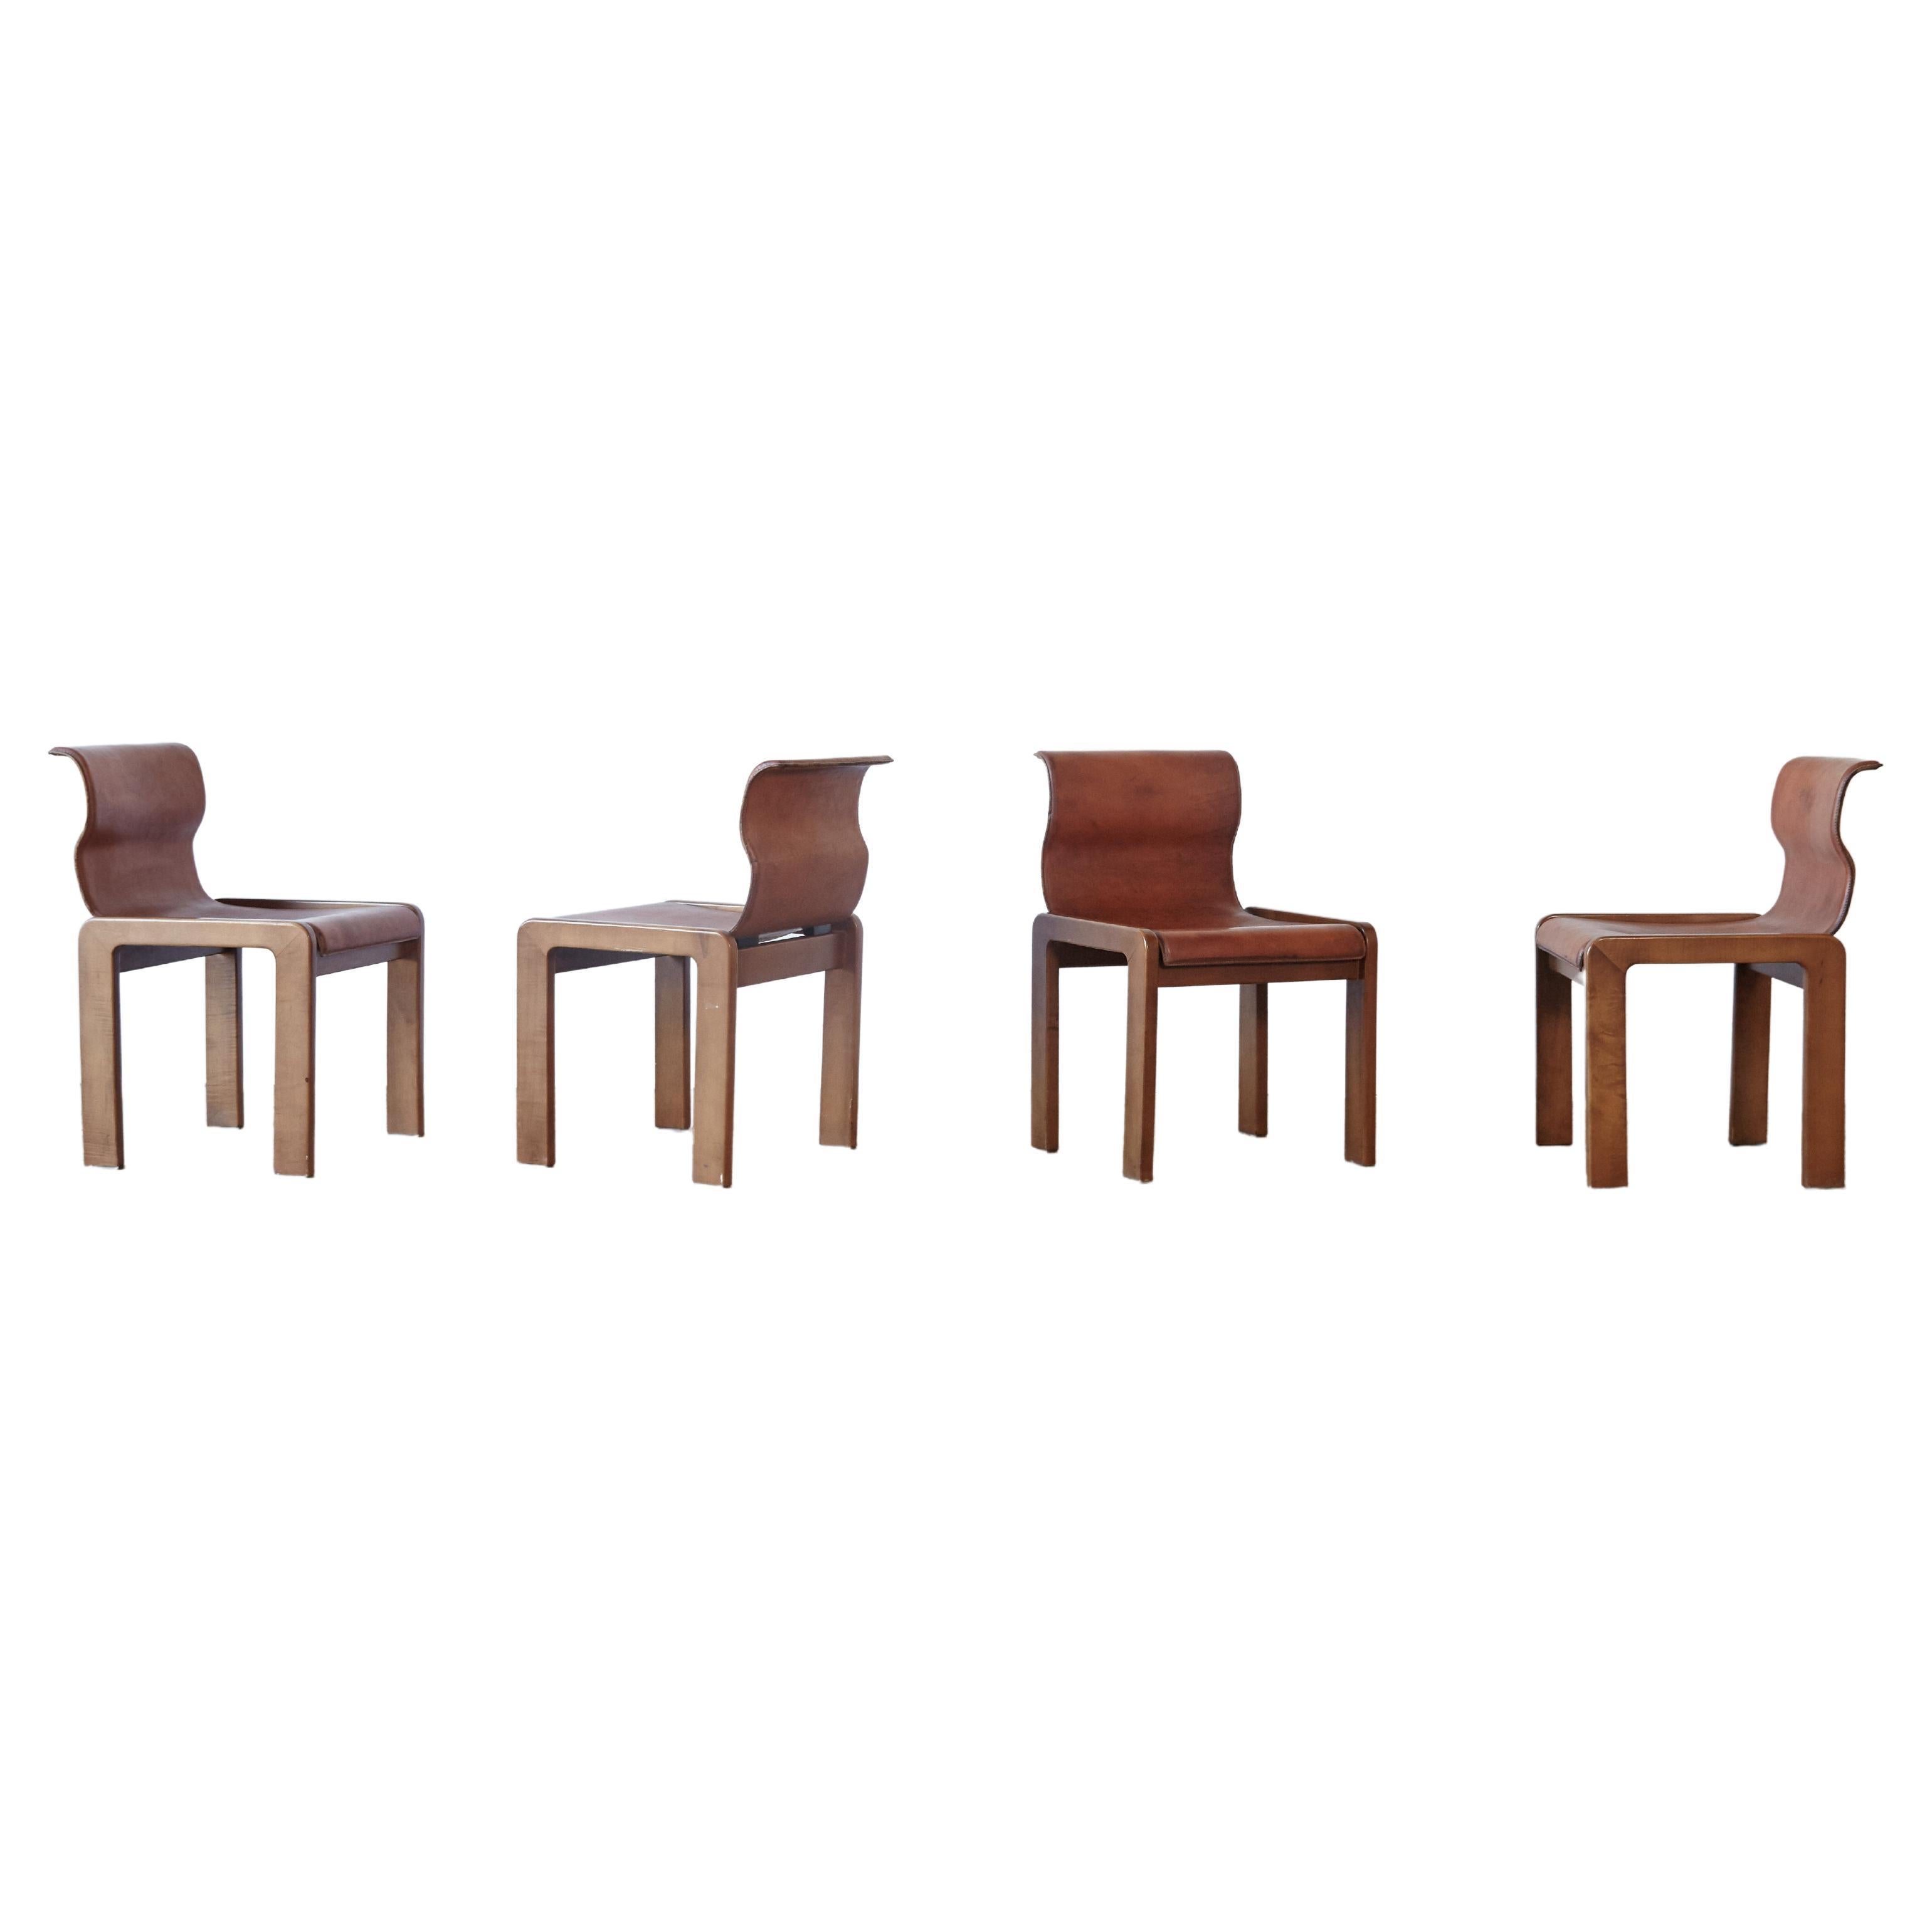 Rare Curved Scarpa Style Dining Chairs, Leather and Wood, Italy, 1960s/70s